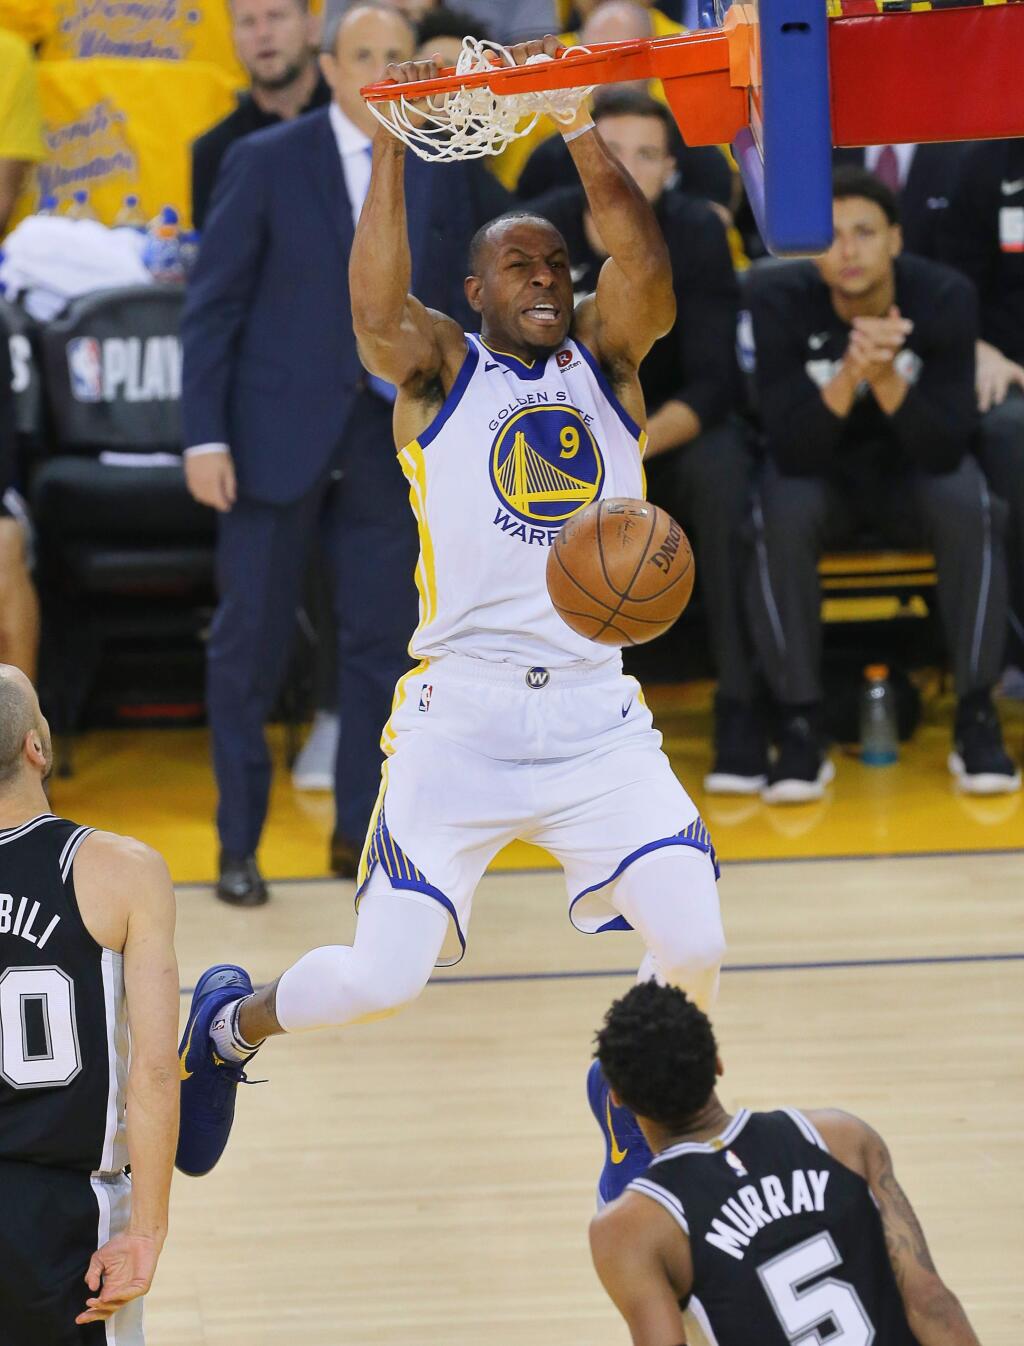 Golden State Warriors guard Andre Iguodala slams the ball down against the San Antonio Spurs, during their game in Oakland on Tuesday, April 24, 2018. (Christopher Chung/ The Press Democrat)